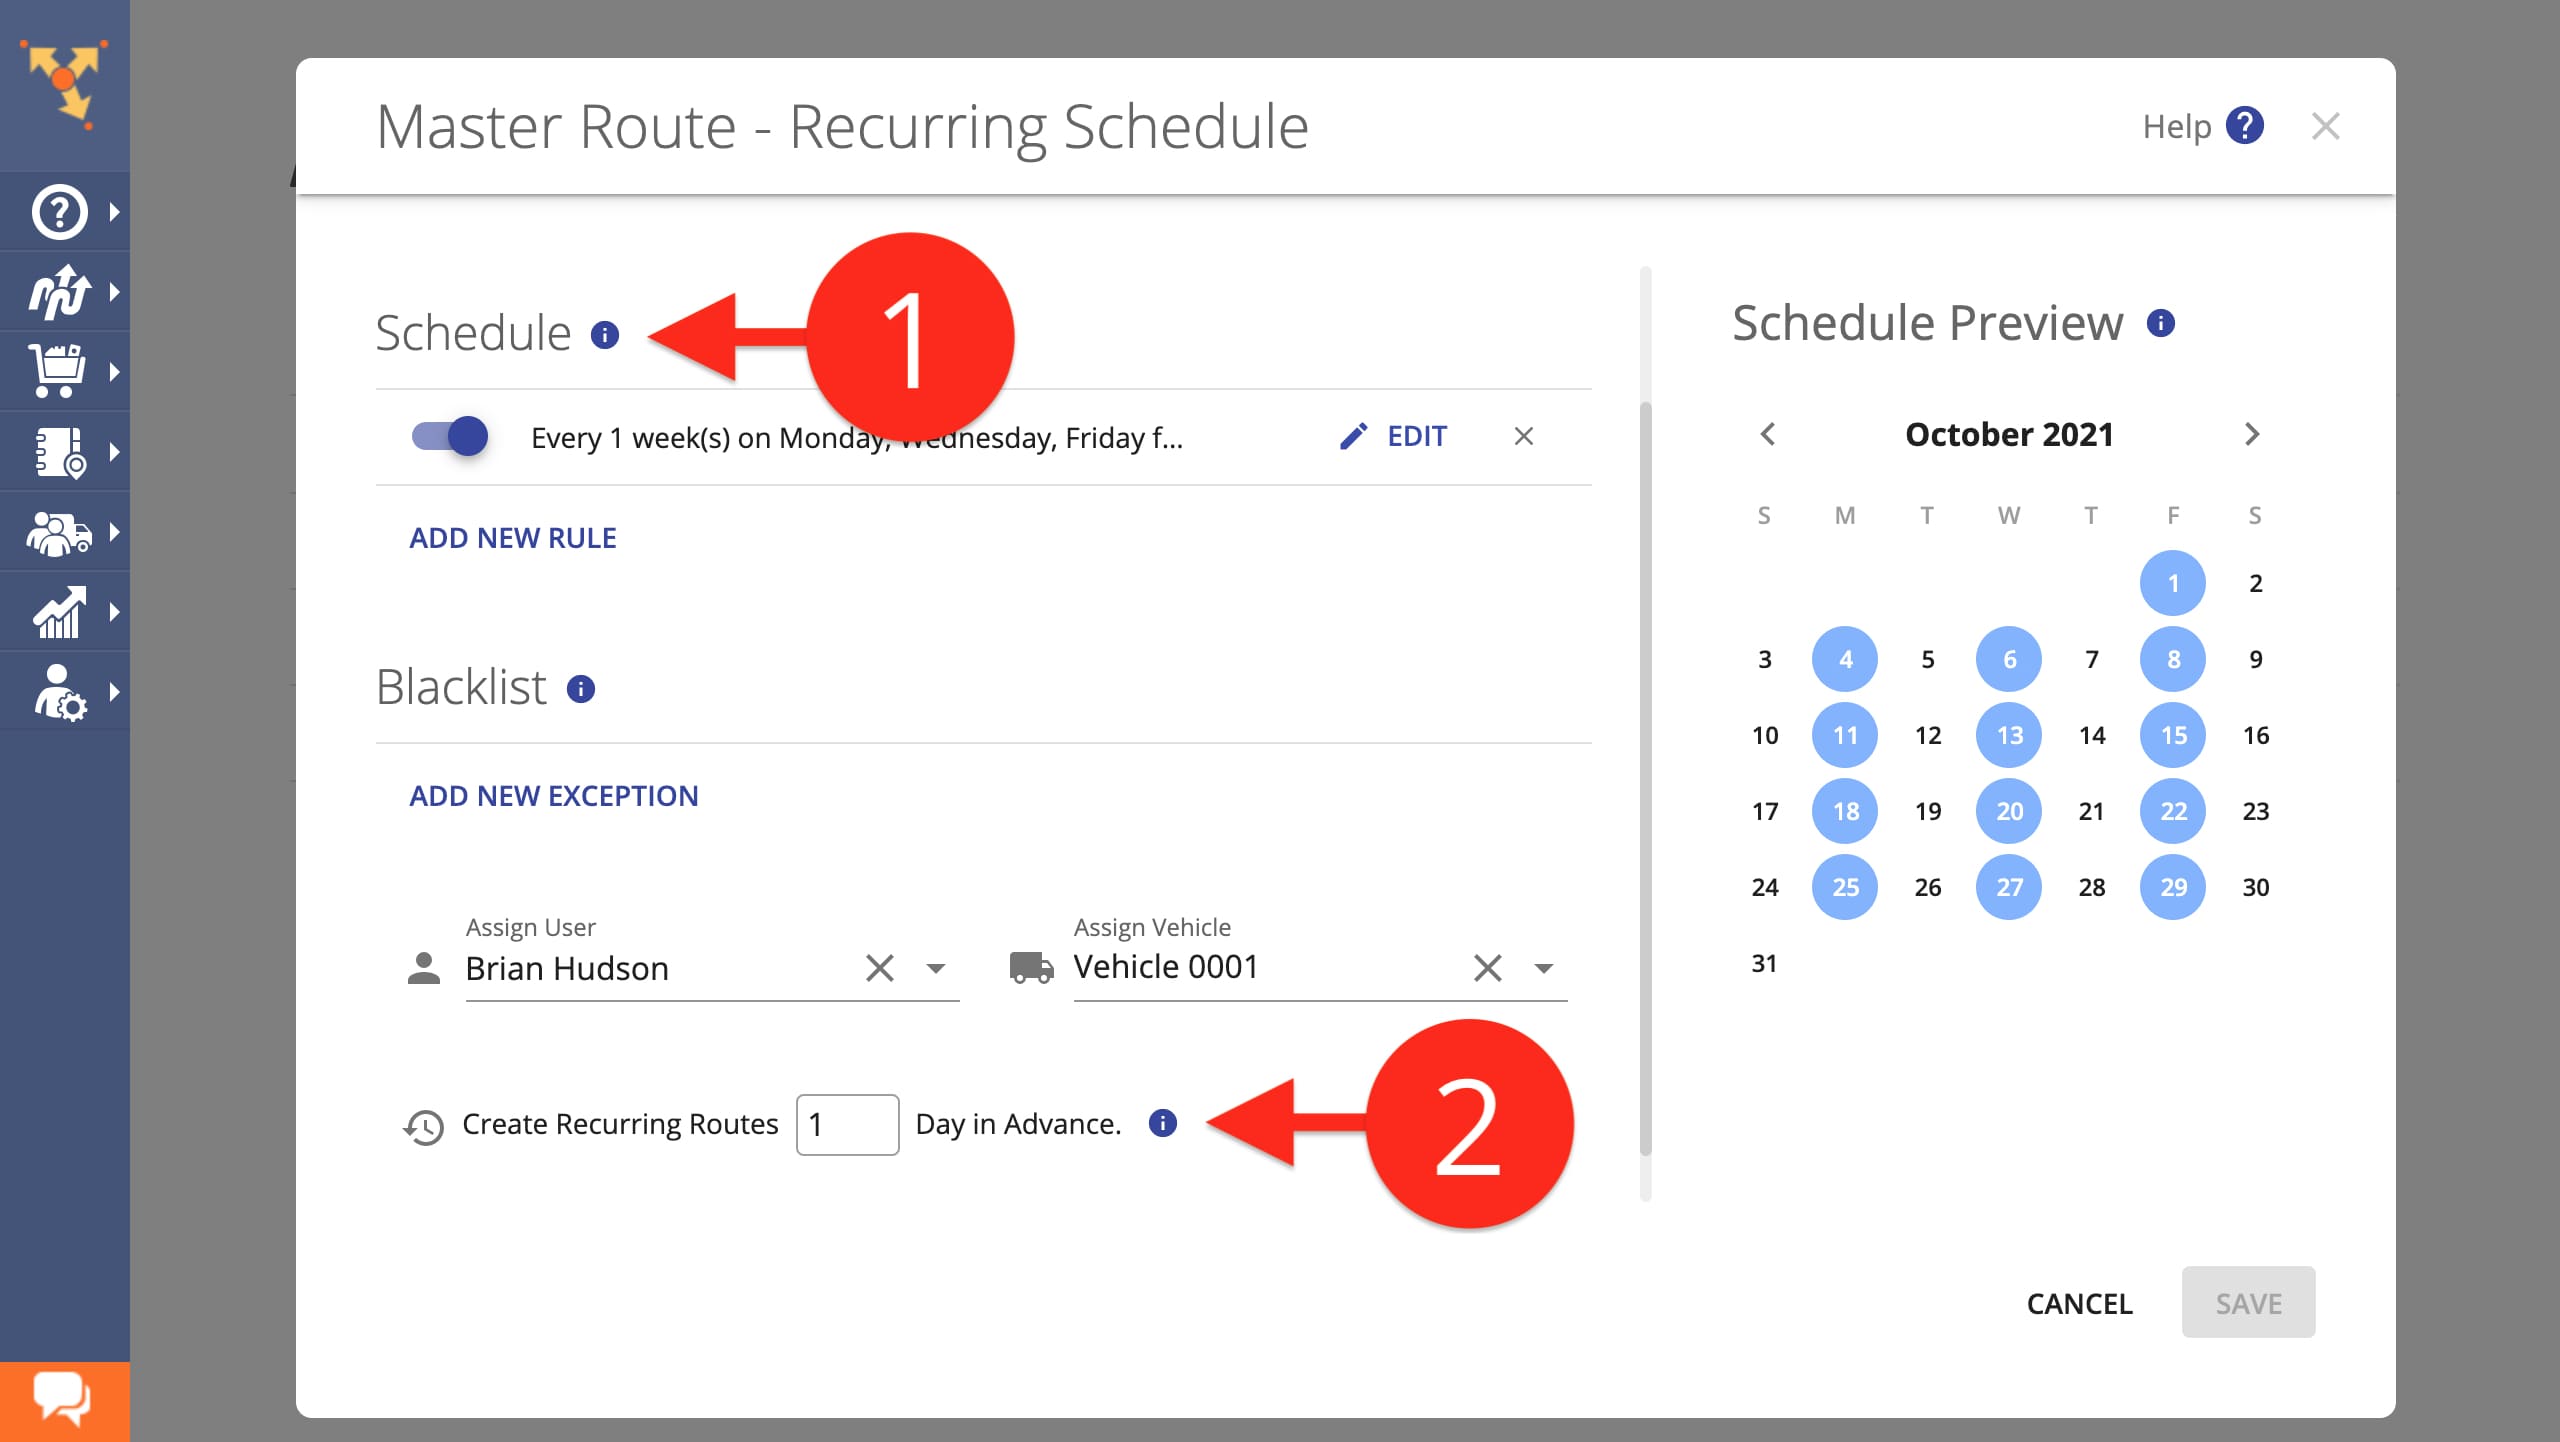 Schedule delivery and plan recurring delivery routes in advance to automate delivery and estimate future workload.